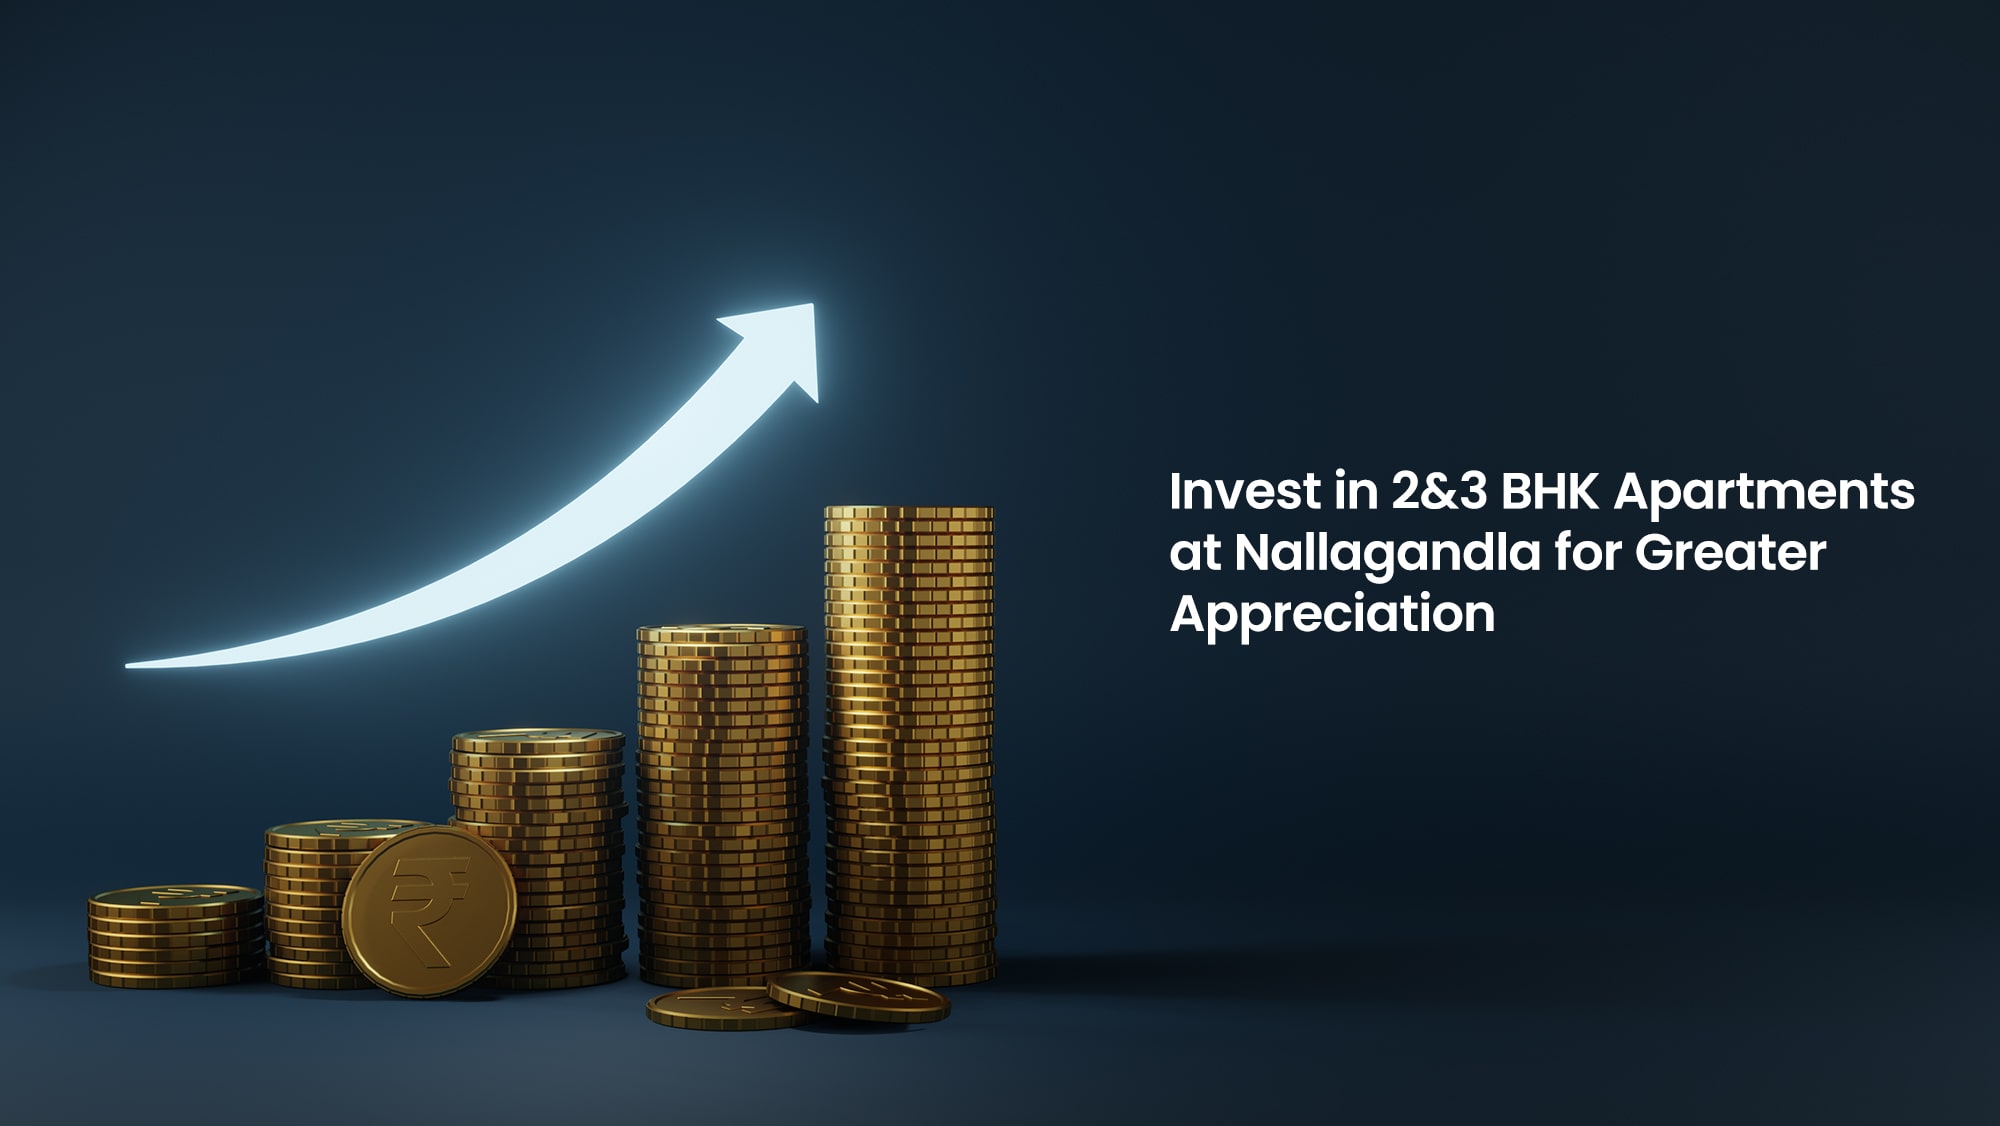 Invest in 2 & 3 BHK Apartments at Nallagandla for Greater Returns